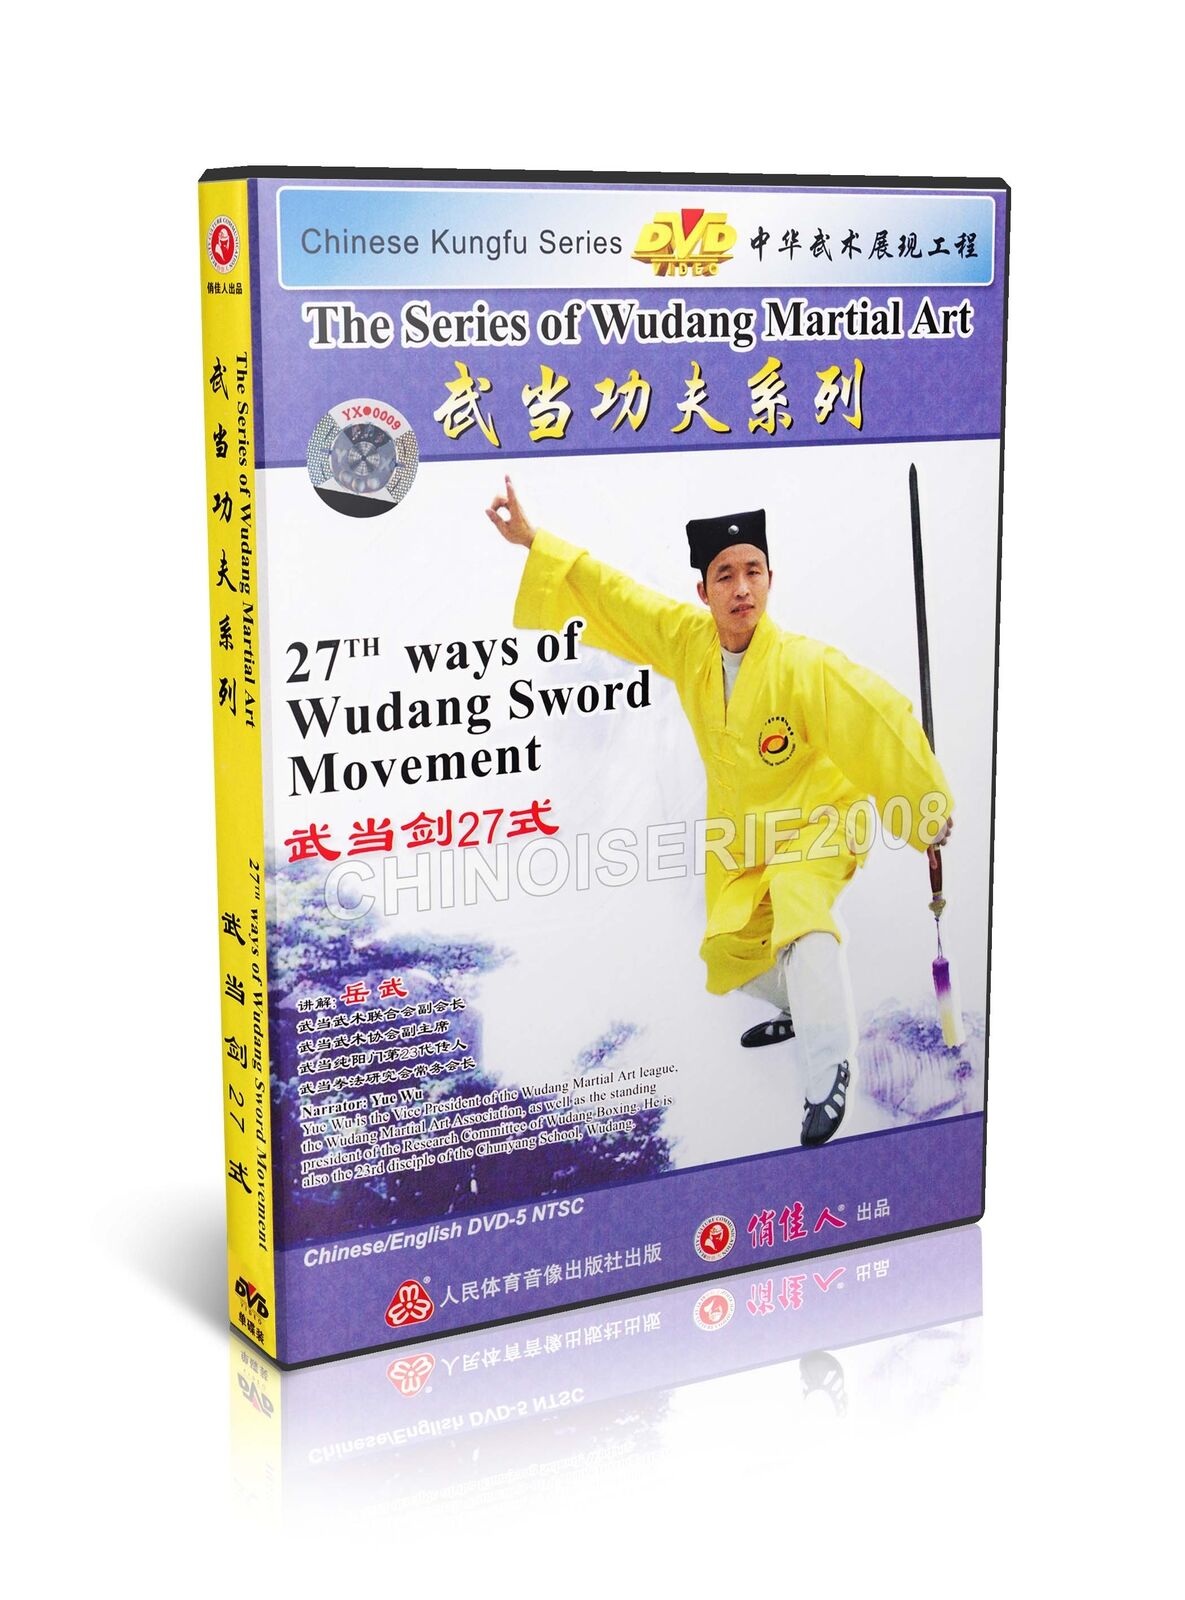 Chinese Kungfu Martial Art  27th ways of Wudang Sword Movement by Yue Wu DVD